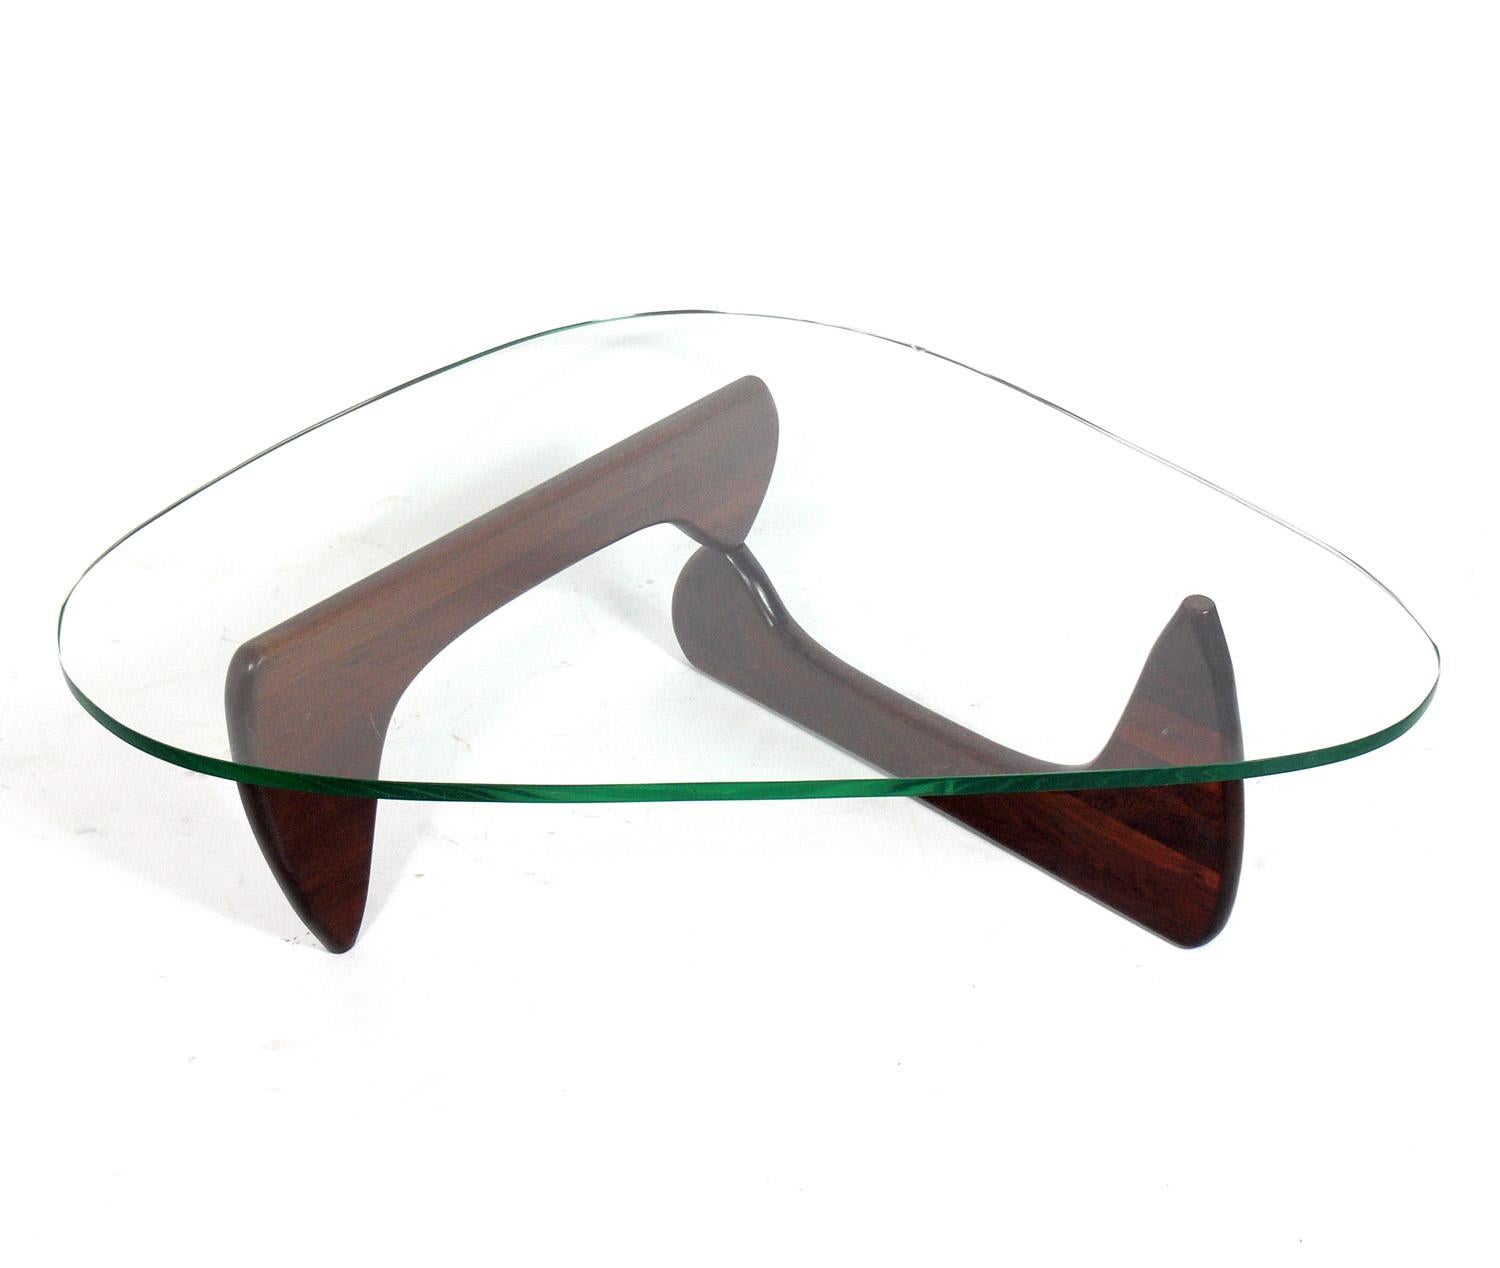 Sculptural coffee table, model IN-50, designed by Isamu Noguchi for Herman Miller, American, circa 1950s. The walnut base has been refinished and the table retains it's original green glass top.